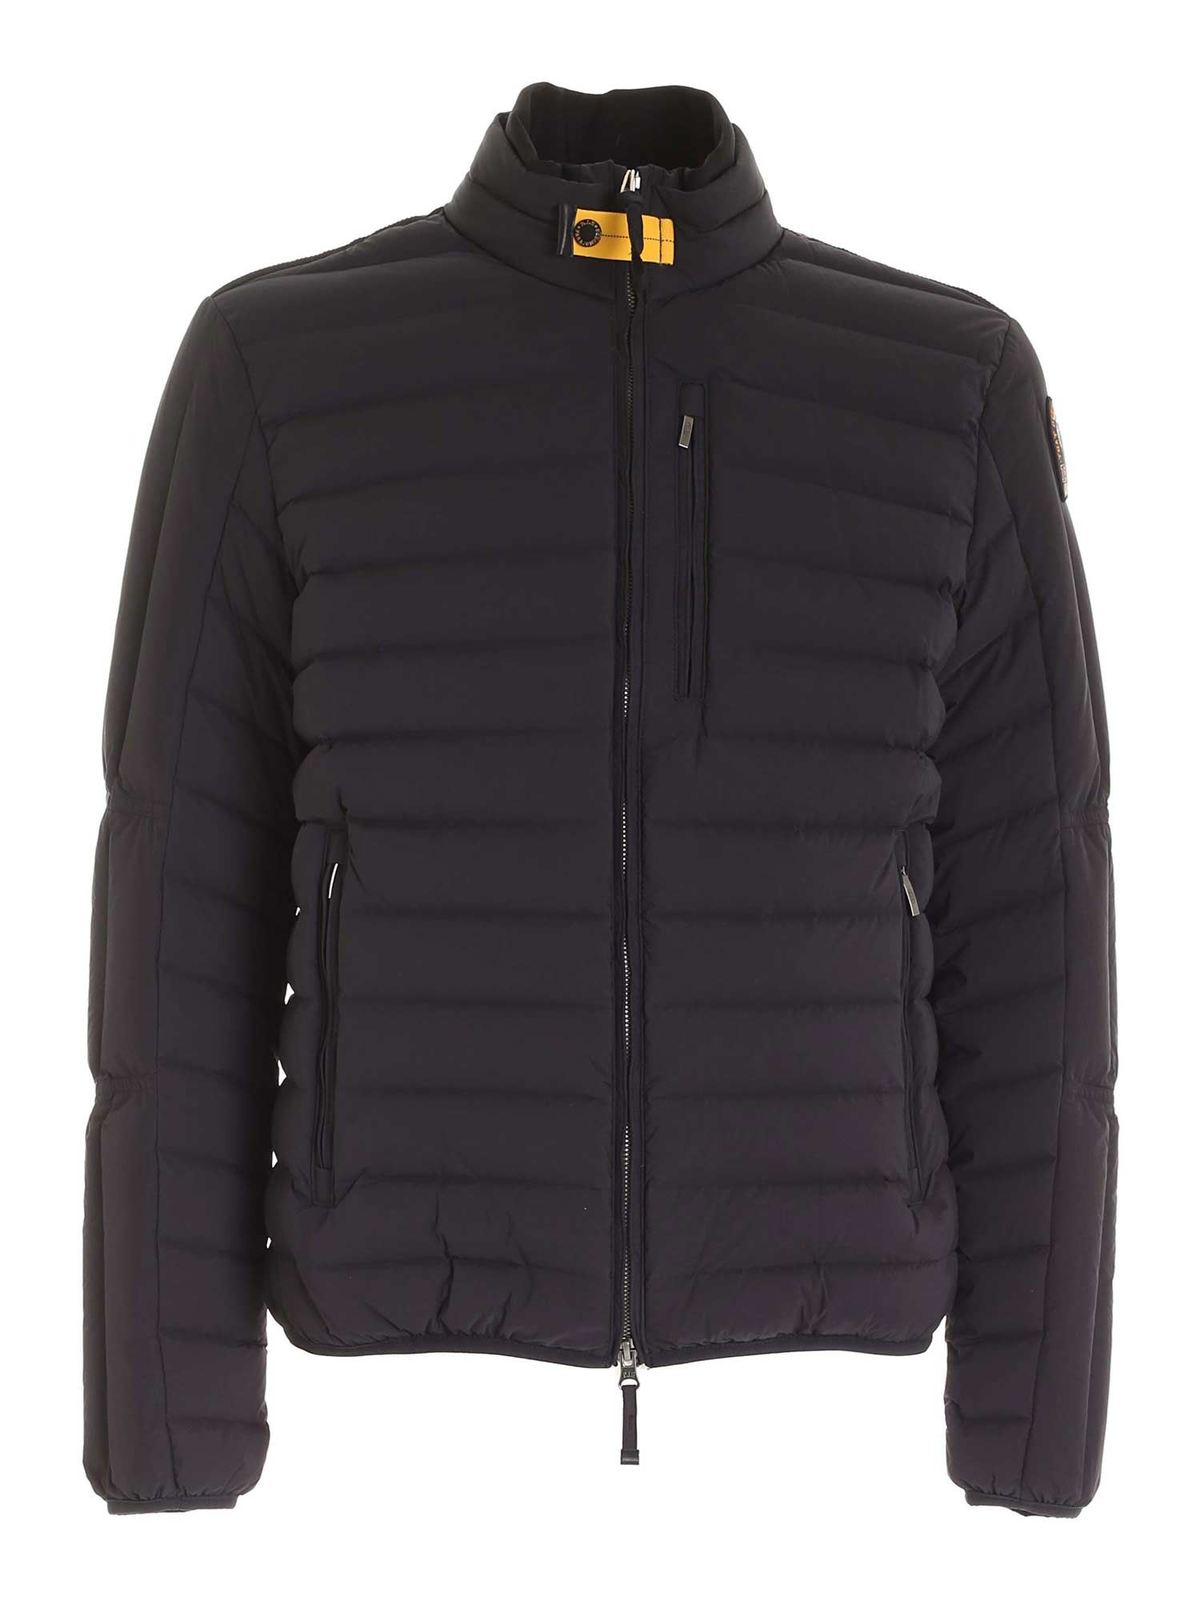 Parajumpers - Moses puffer jacket in black - padded jackets - PMJCKVA02541